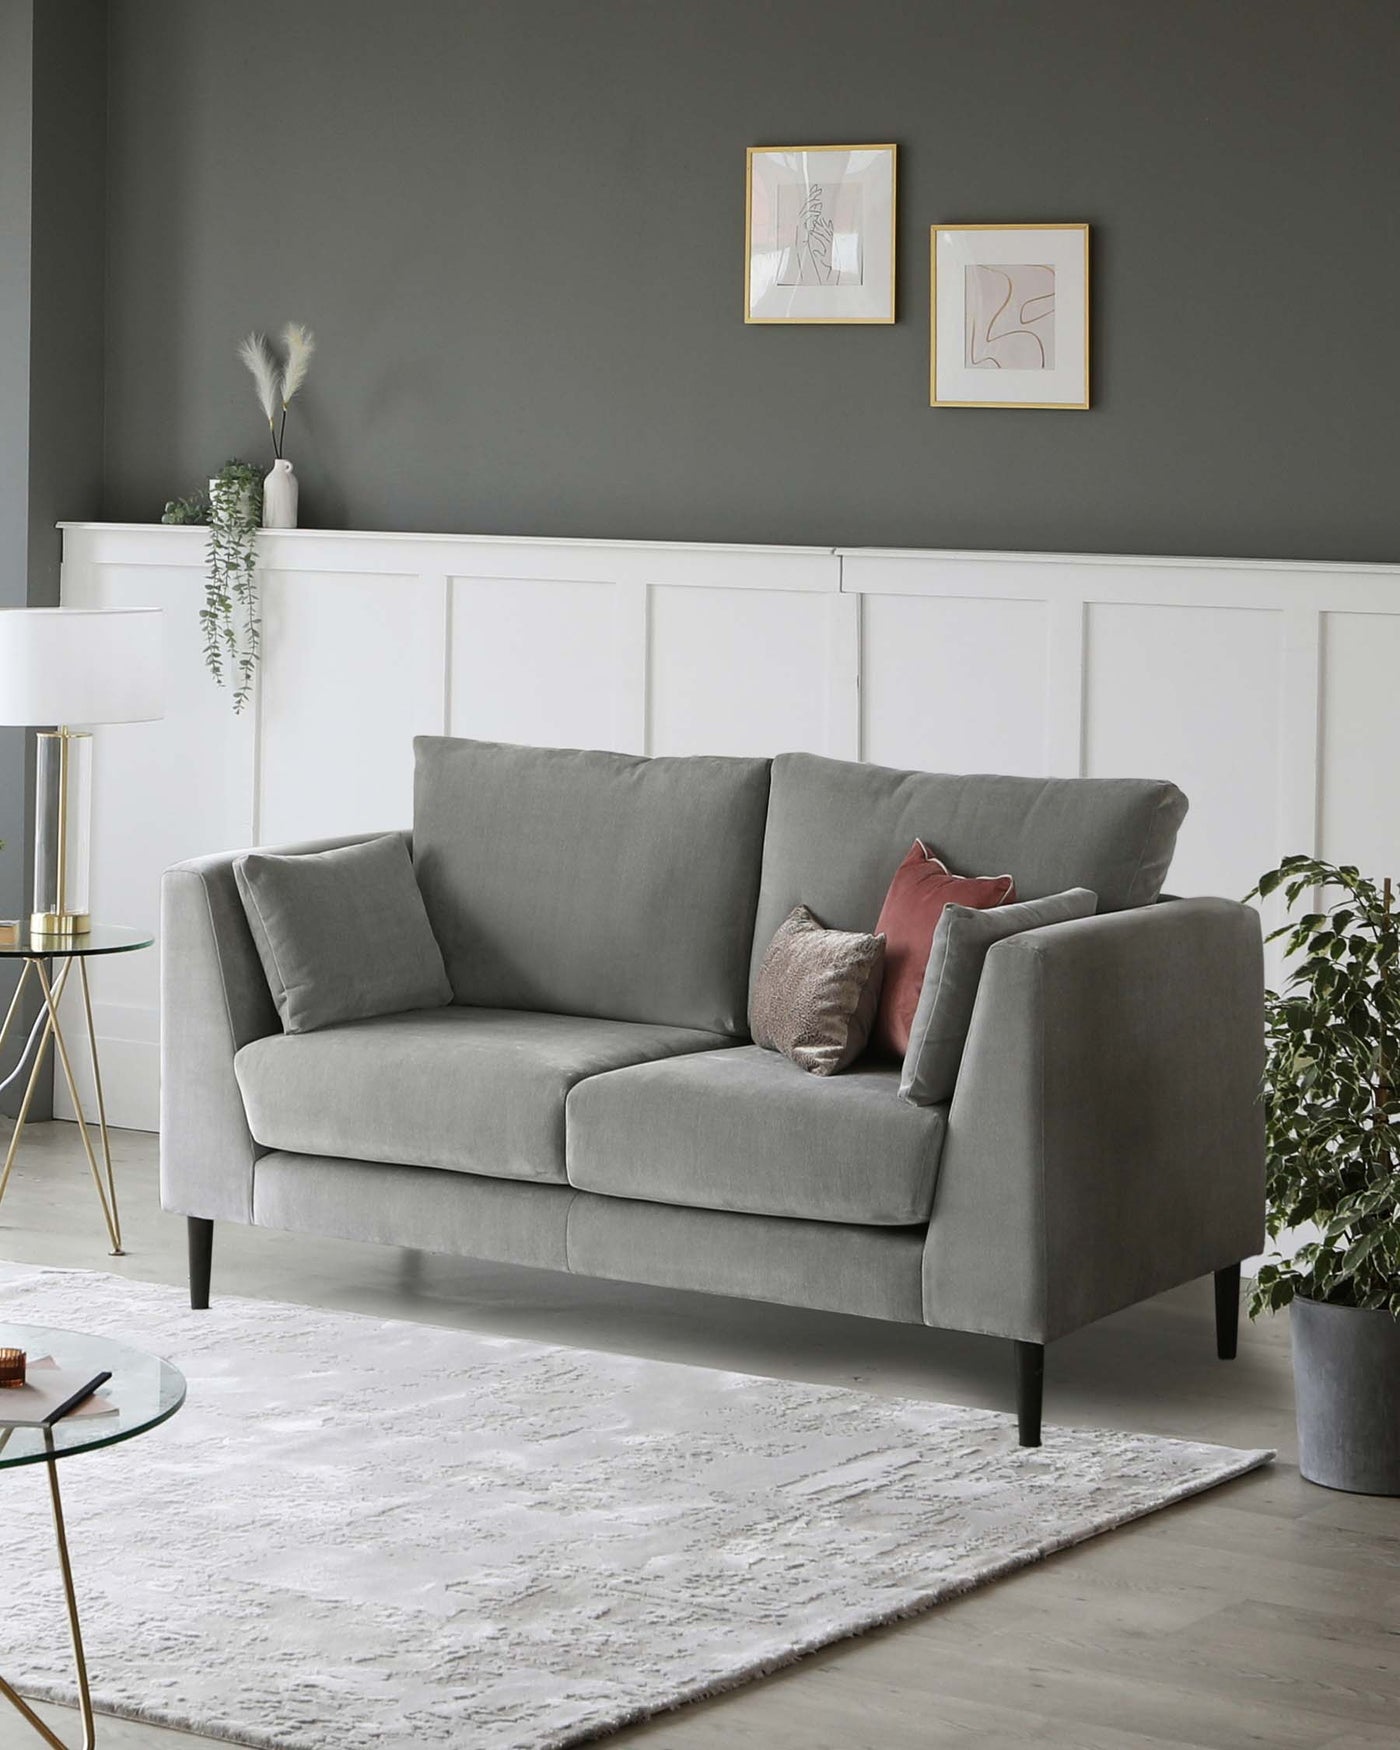 Elegant three-seater sofa in a soft grey fabric, featuring clean lines, cushioned back, and seat with two additional throw pillows in complementary colours, atop tapered dark wooden legs. A small round glass side table with a gold metal frame and a white textured area rug underneath complete the contemporary look. An overarching floor lamp with a white shade and gold stand adds a touch of sophistication in the background.